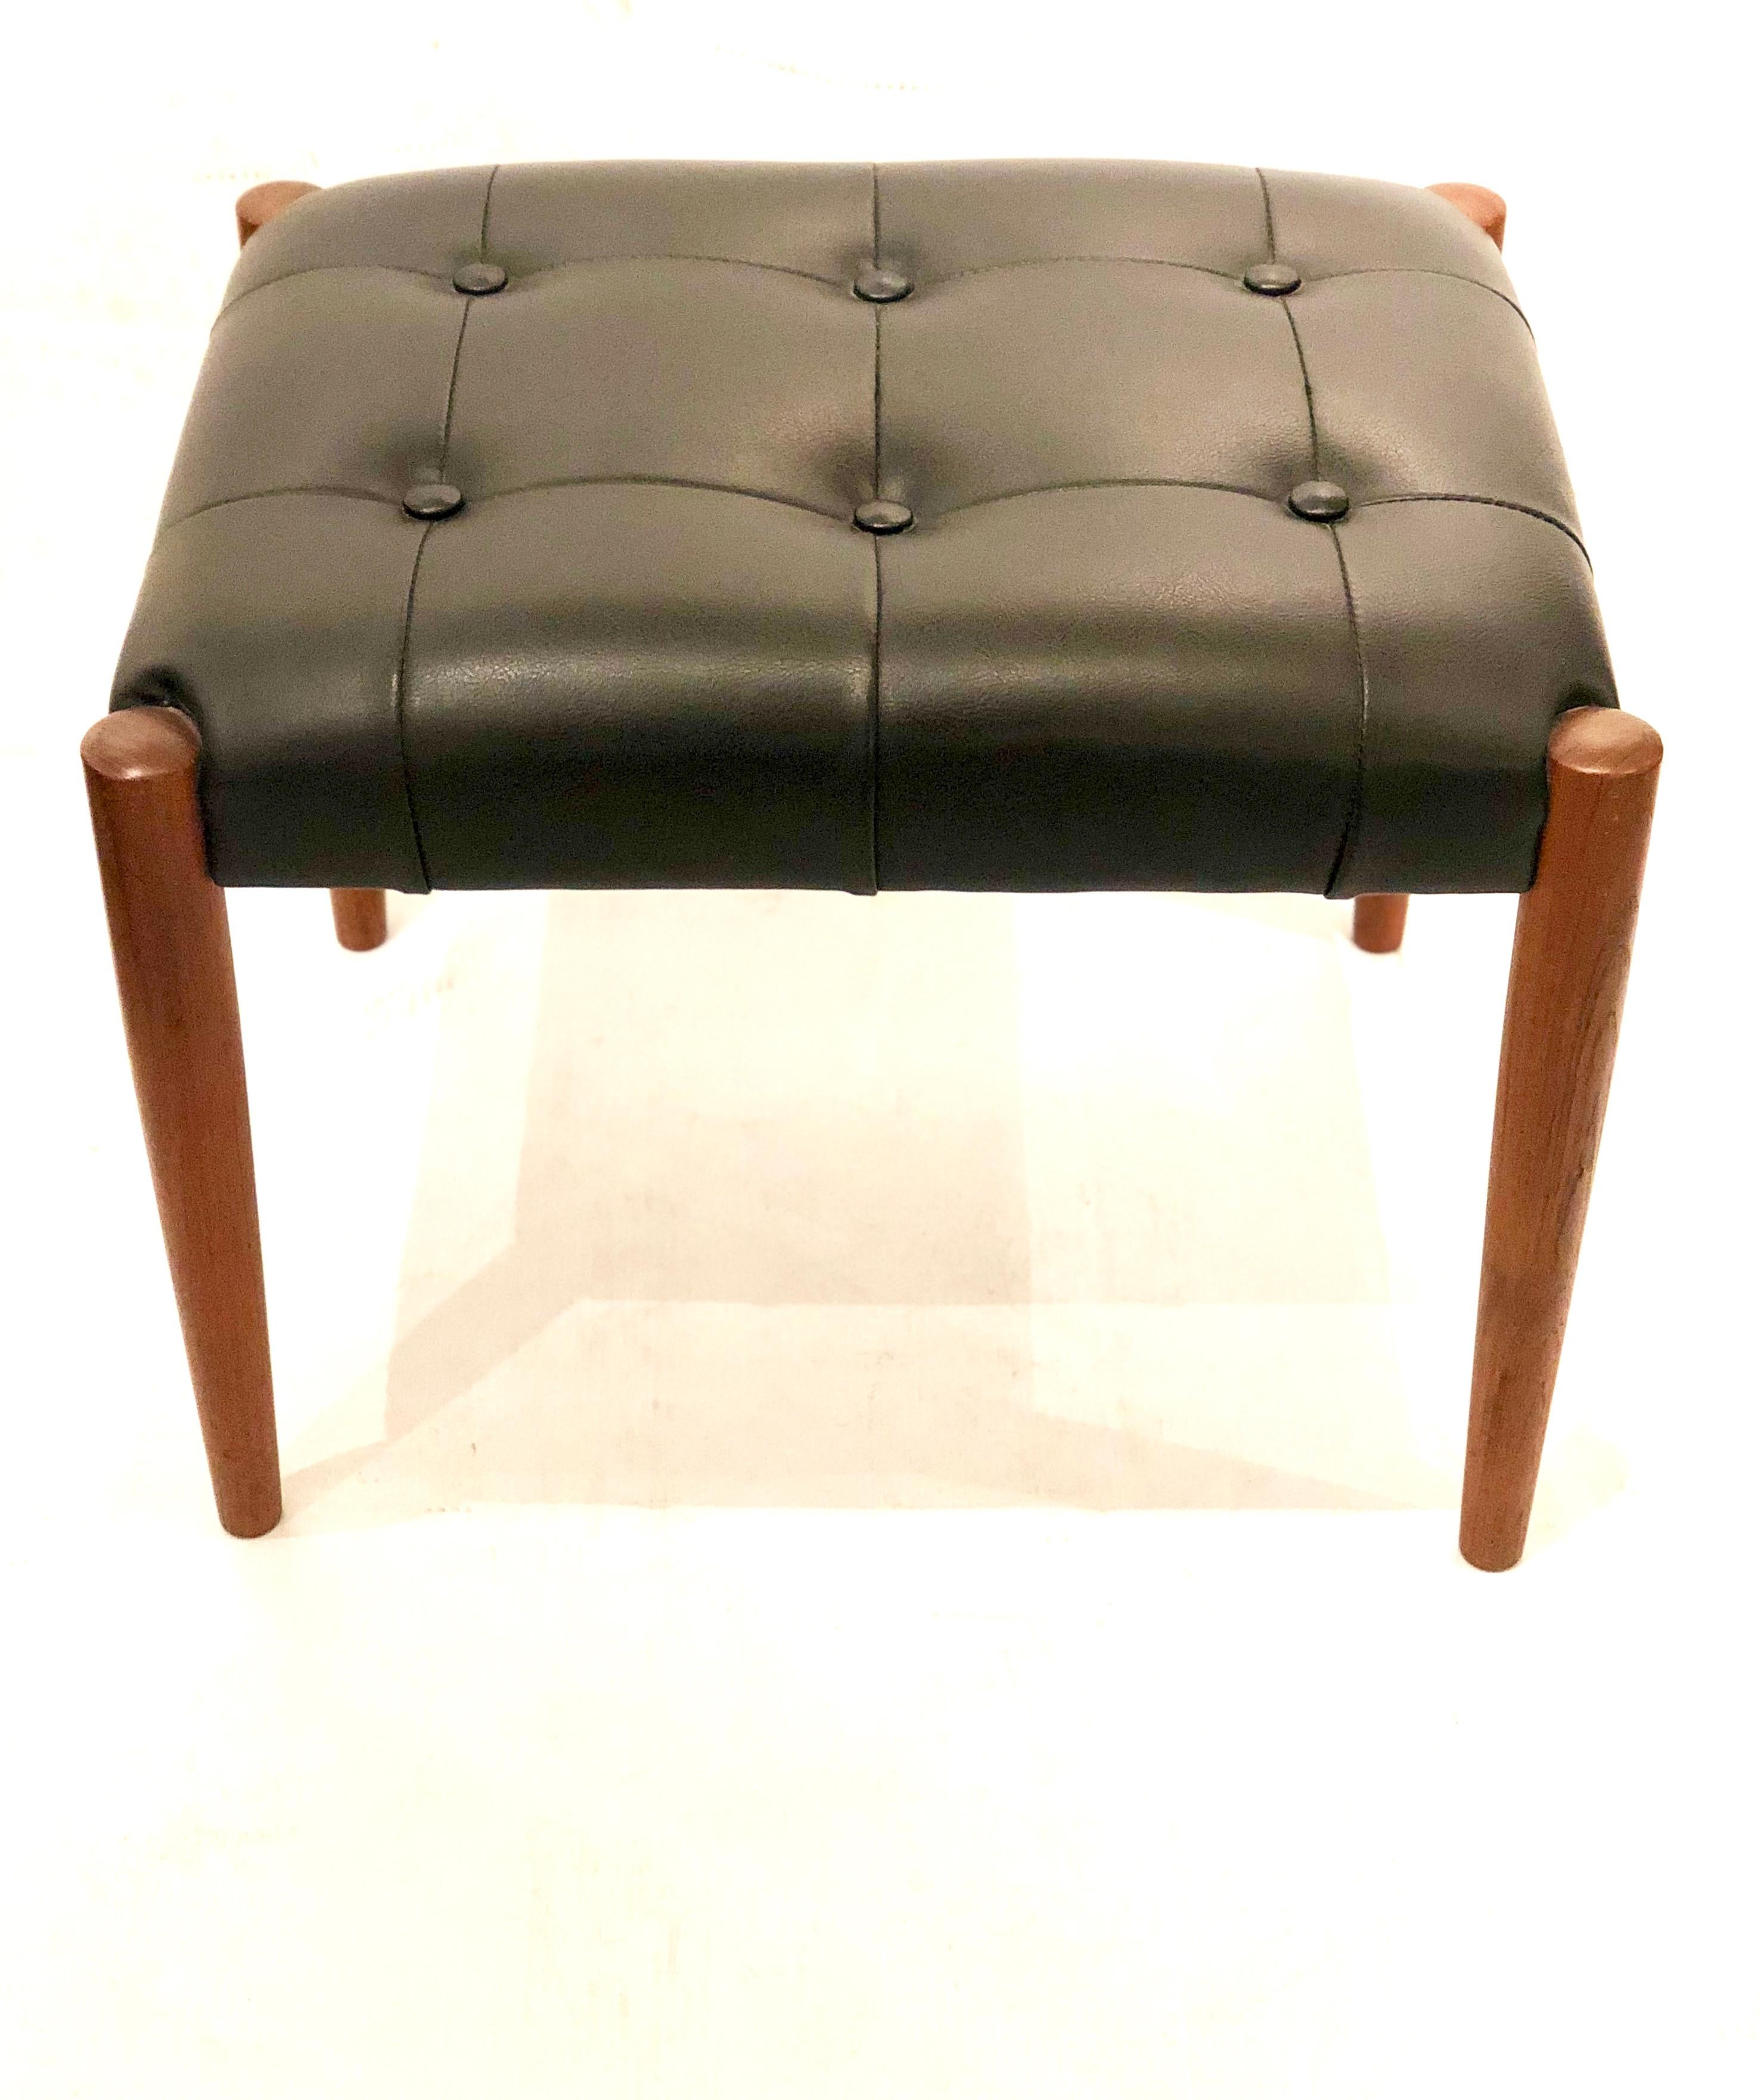 Versatile Danish stool in tufted top in black naugahyde with solid teak legs, circa 1950s solid and sturdy in original fabric nice condition.